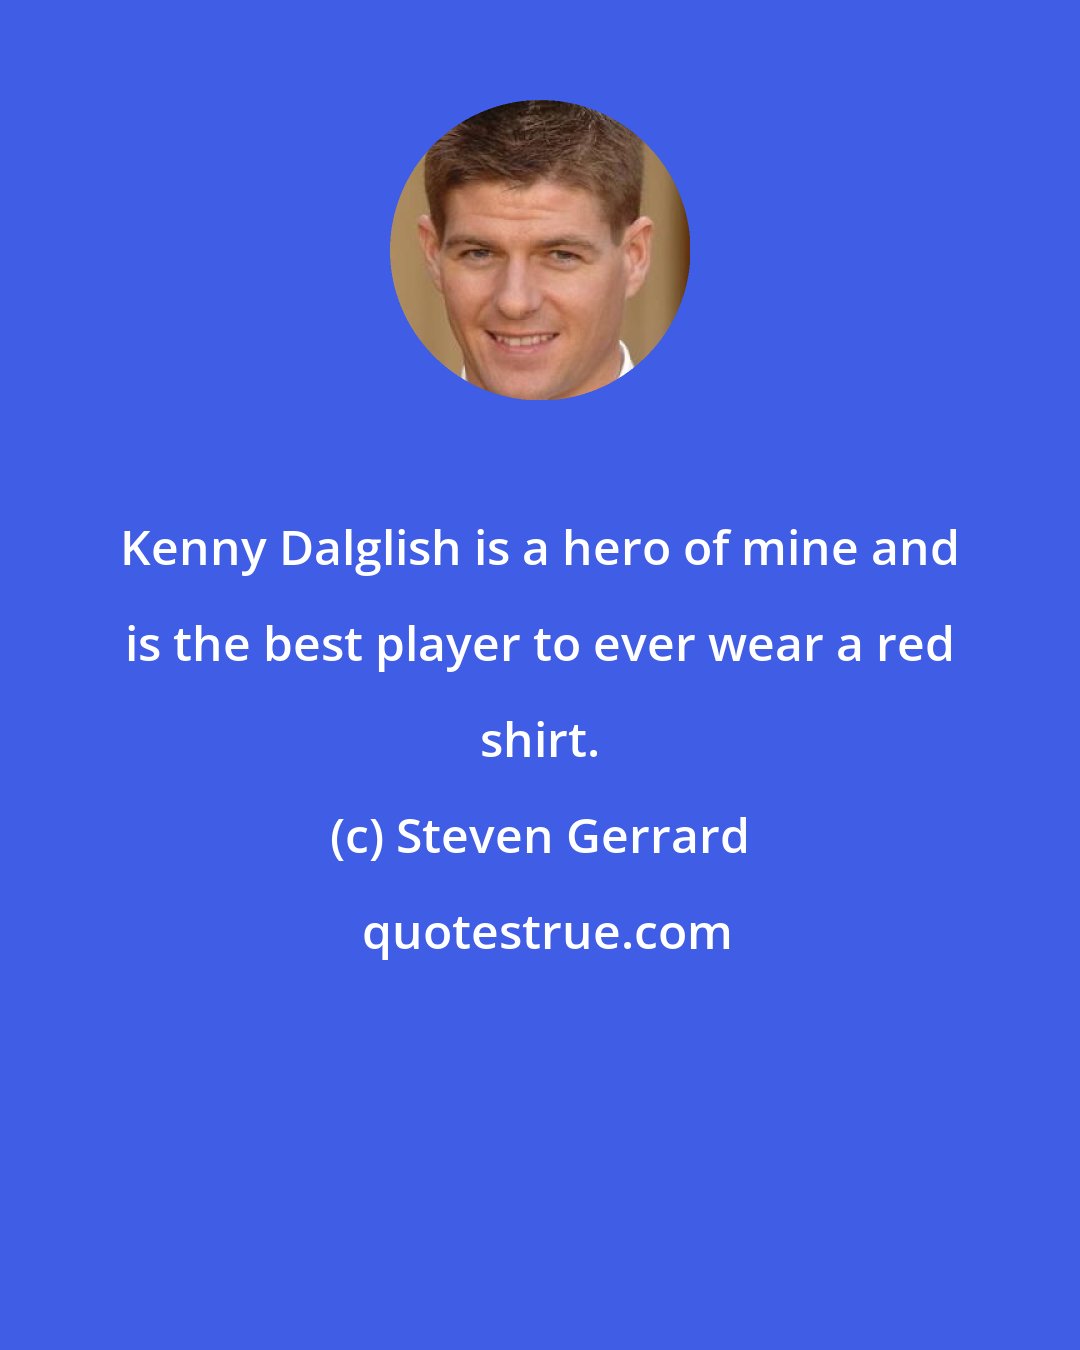 Steven Gerrard: Kenny Dalglish is a hero of mine and is the best player to ever wear a red shirt.